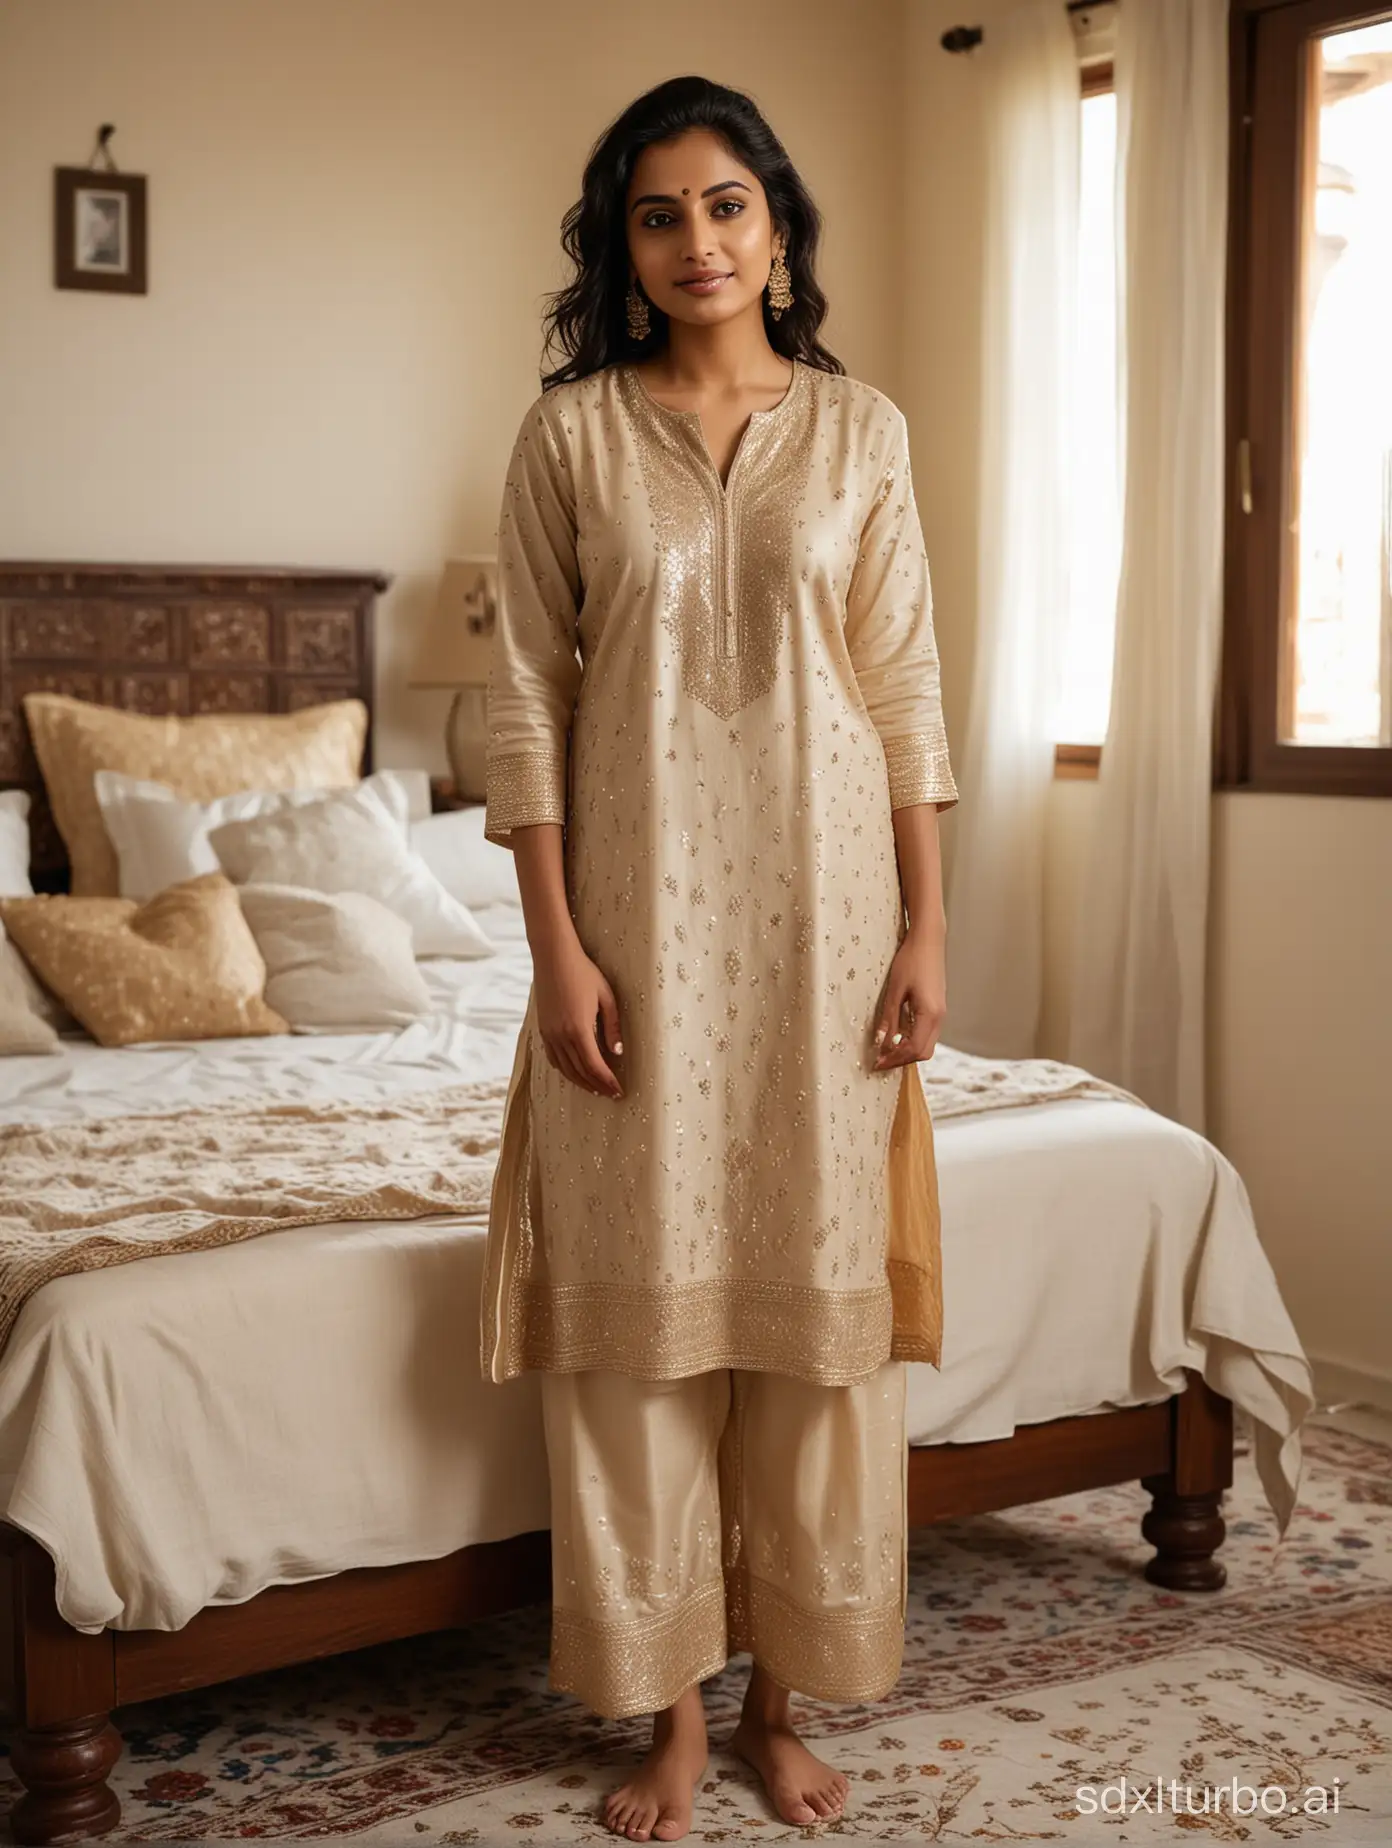 Indian woman in neutral 
sequin Hand Embroidered Kurta Set With Pants And Dupatta
 standing on the floor in a bedroom which is furnished in traditional Indian style with a made bed, room brightly lit, emulate Nikon D6 shot, wide angle shot, soft warm lighting, photorealistic